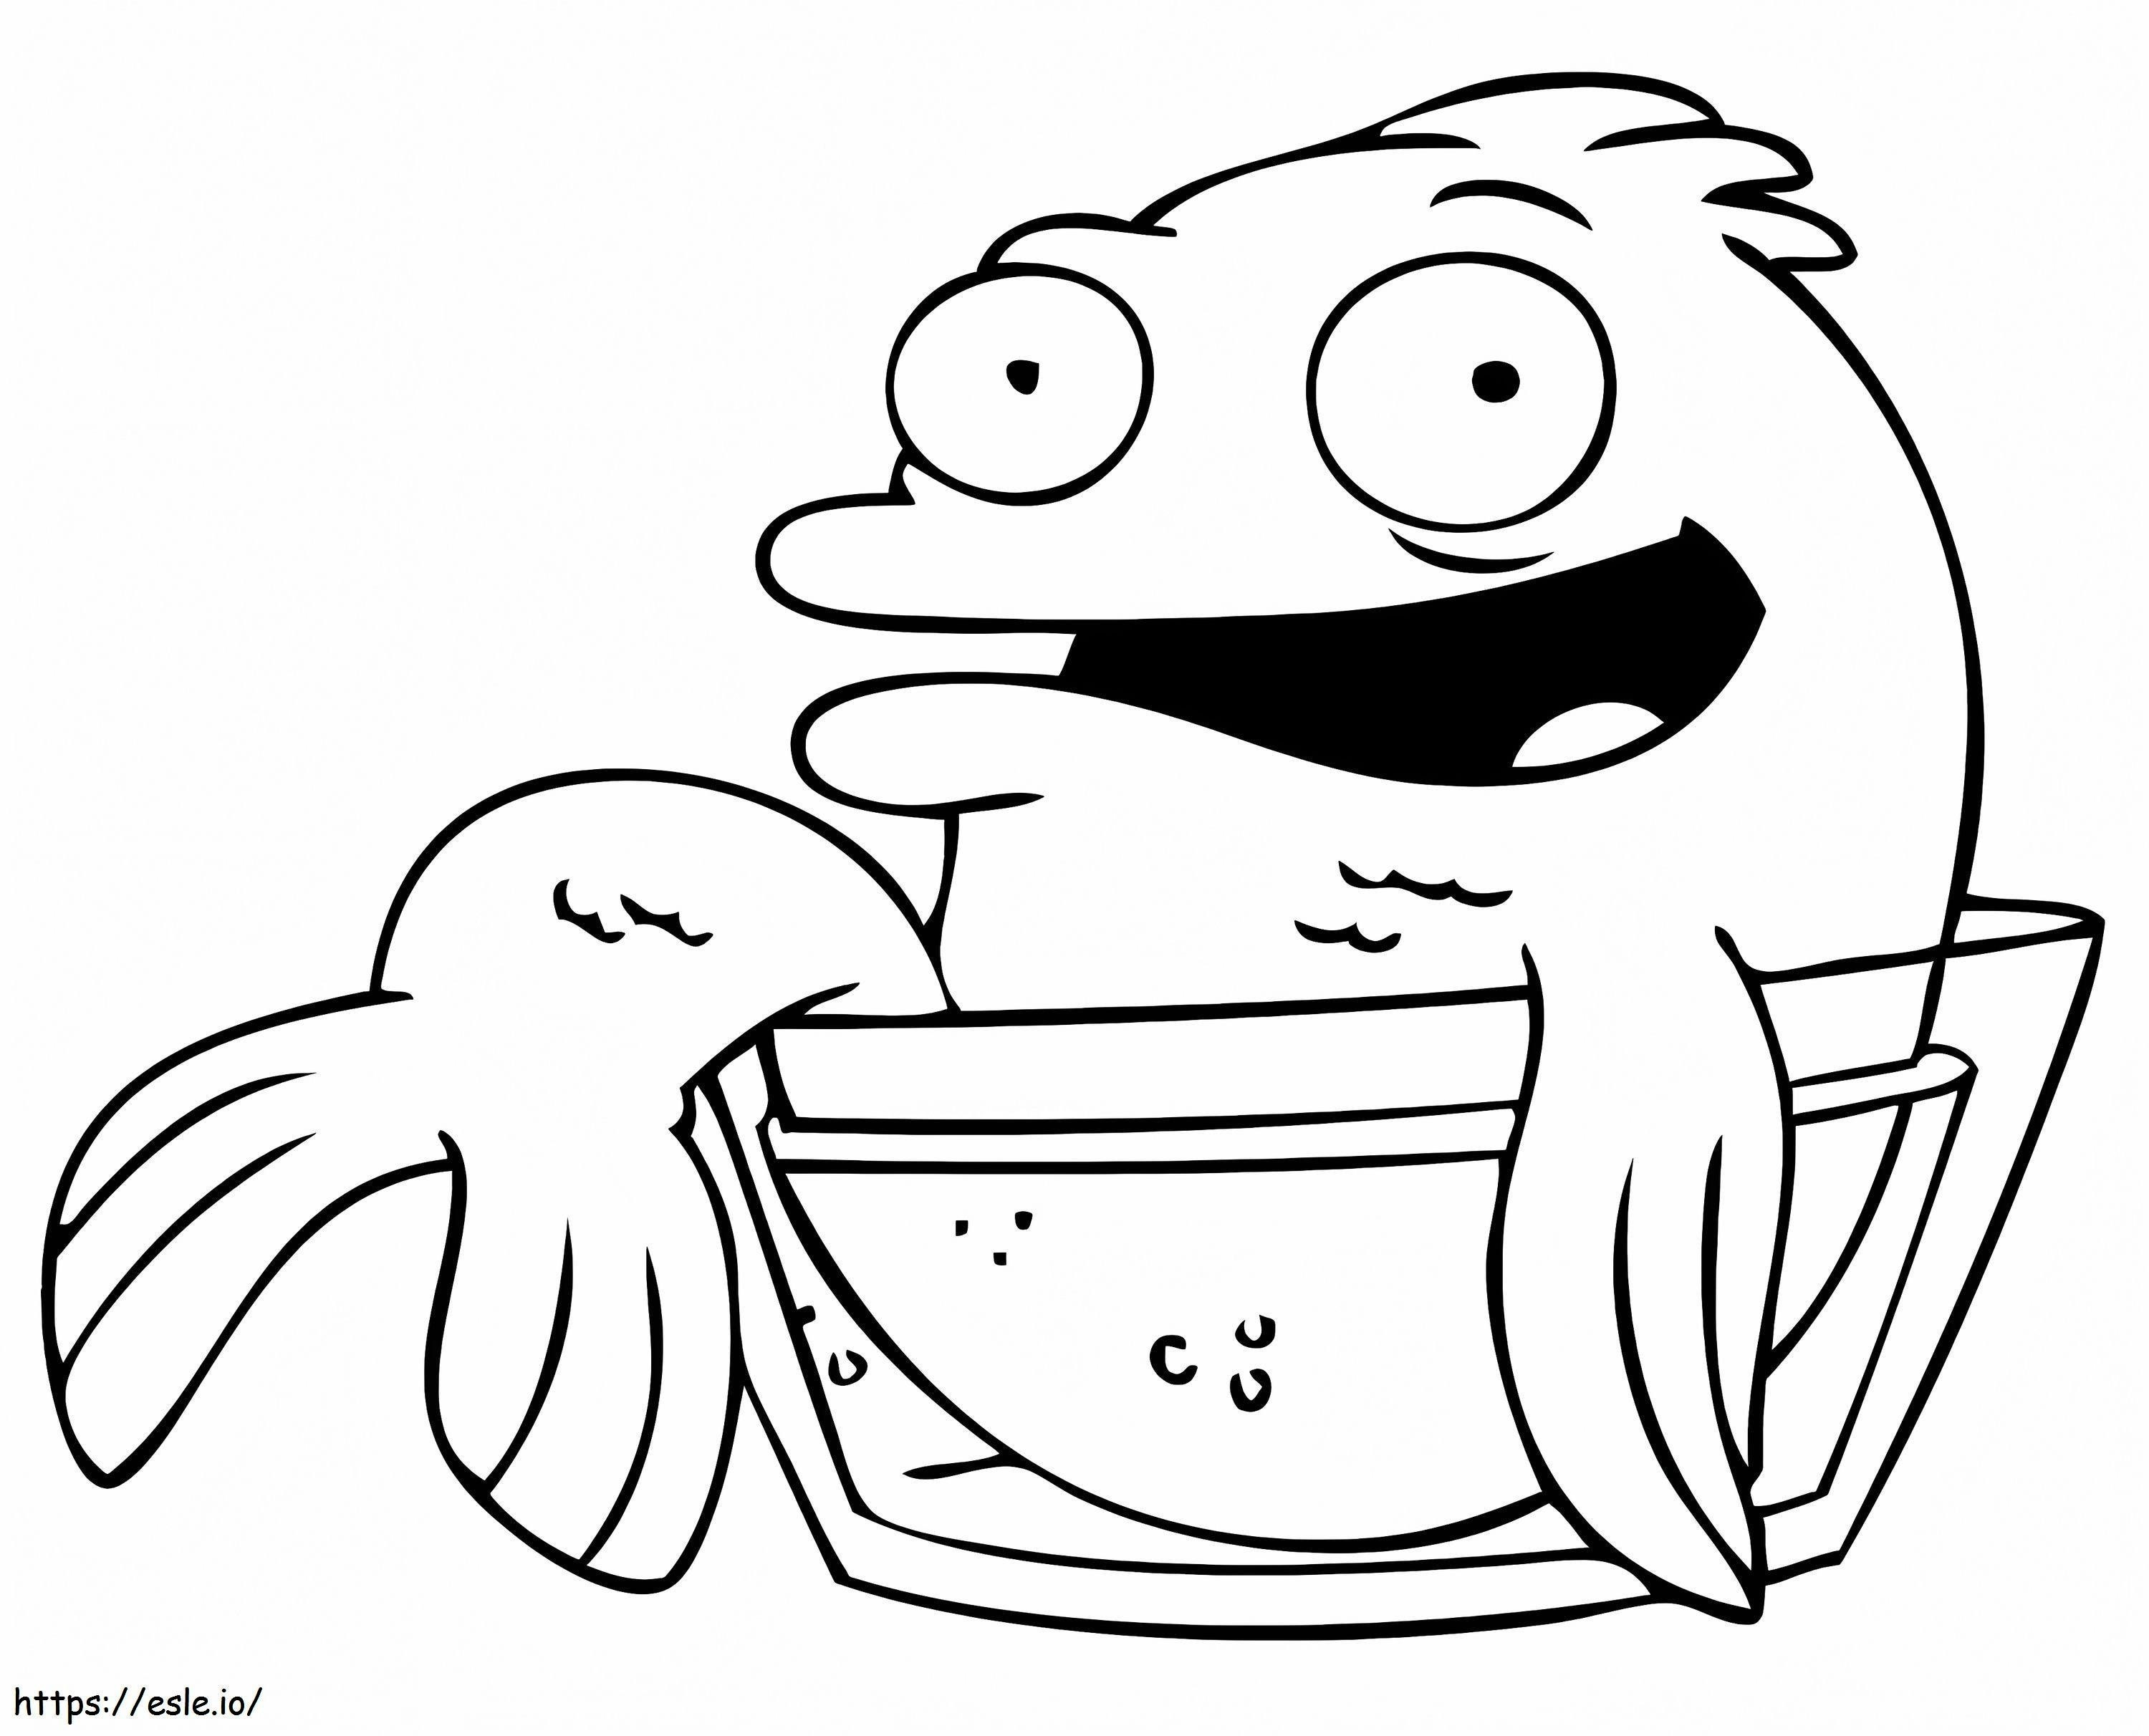 Klaus From American Dad coloring page